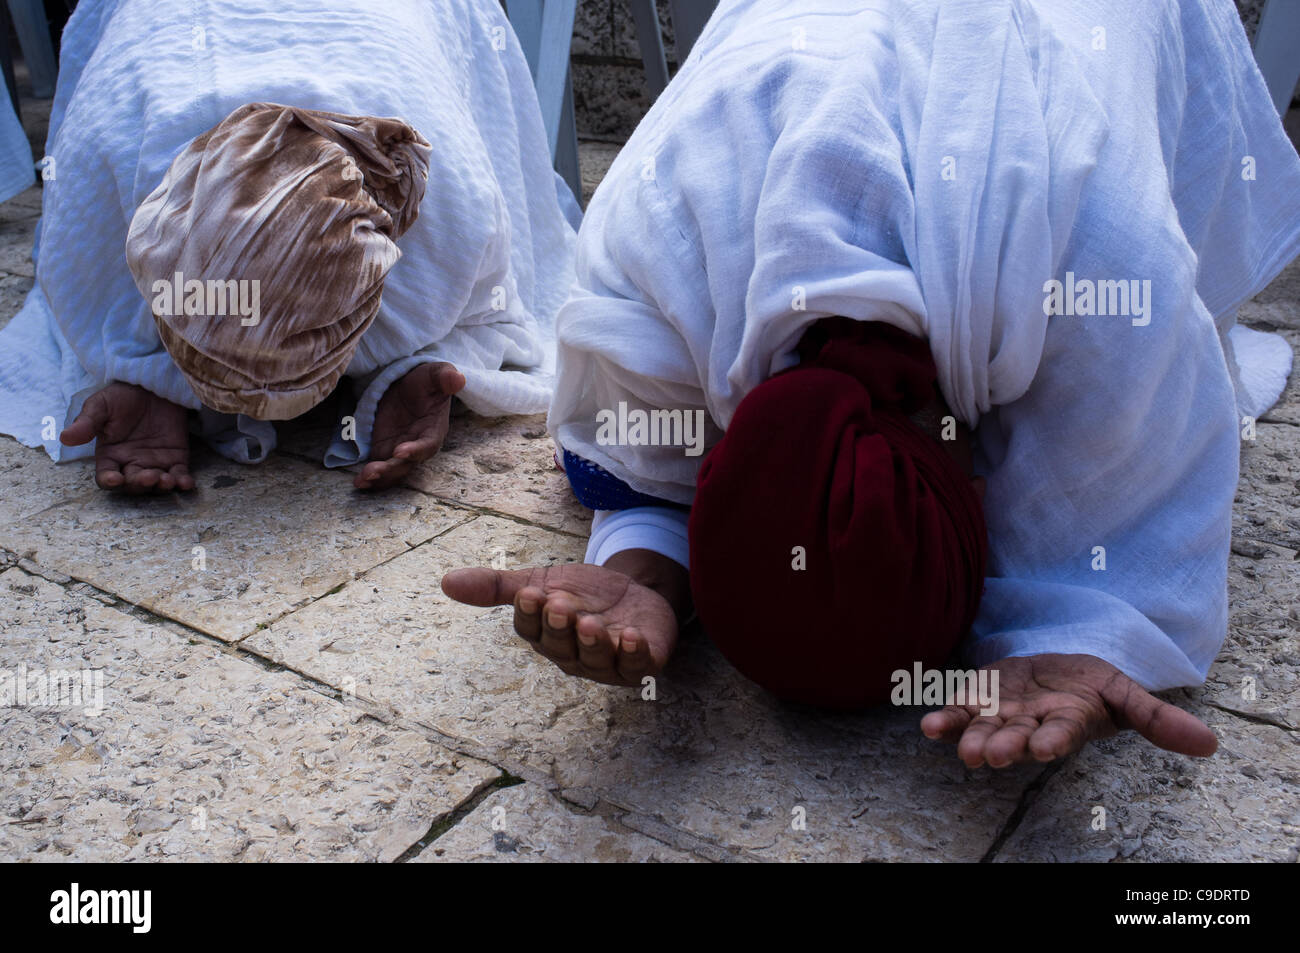 Ethiopian women take part in prayer as the Jewish Ethiopian community in Israel celebrates the Sigd Holiday, symbolizing their yearning for Jerusalem, at the Sherover Promenade overlooking the Temple Mount. Jerusalem, Israel. 24th November 2011. Stock Photo